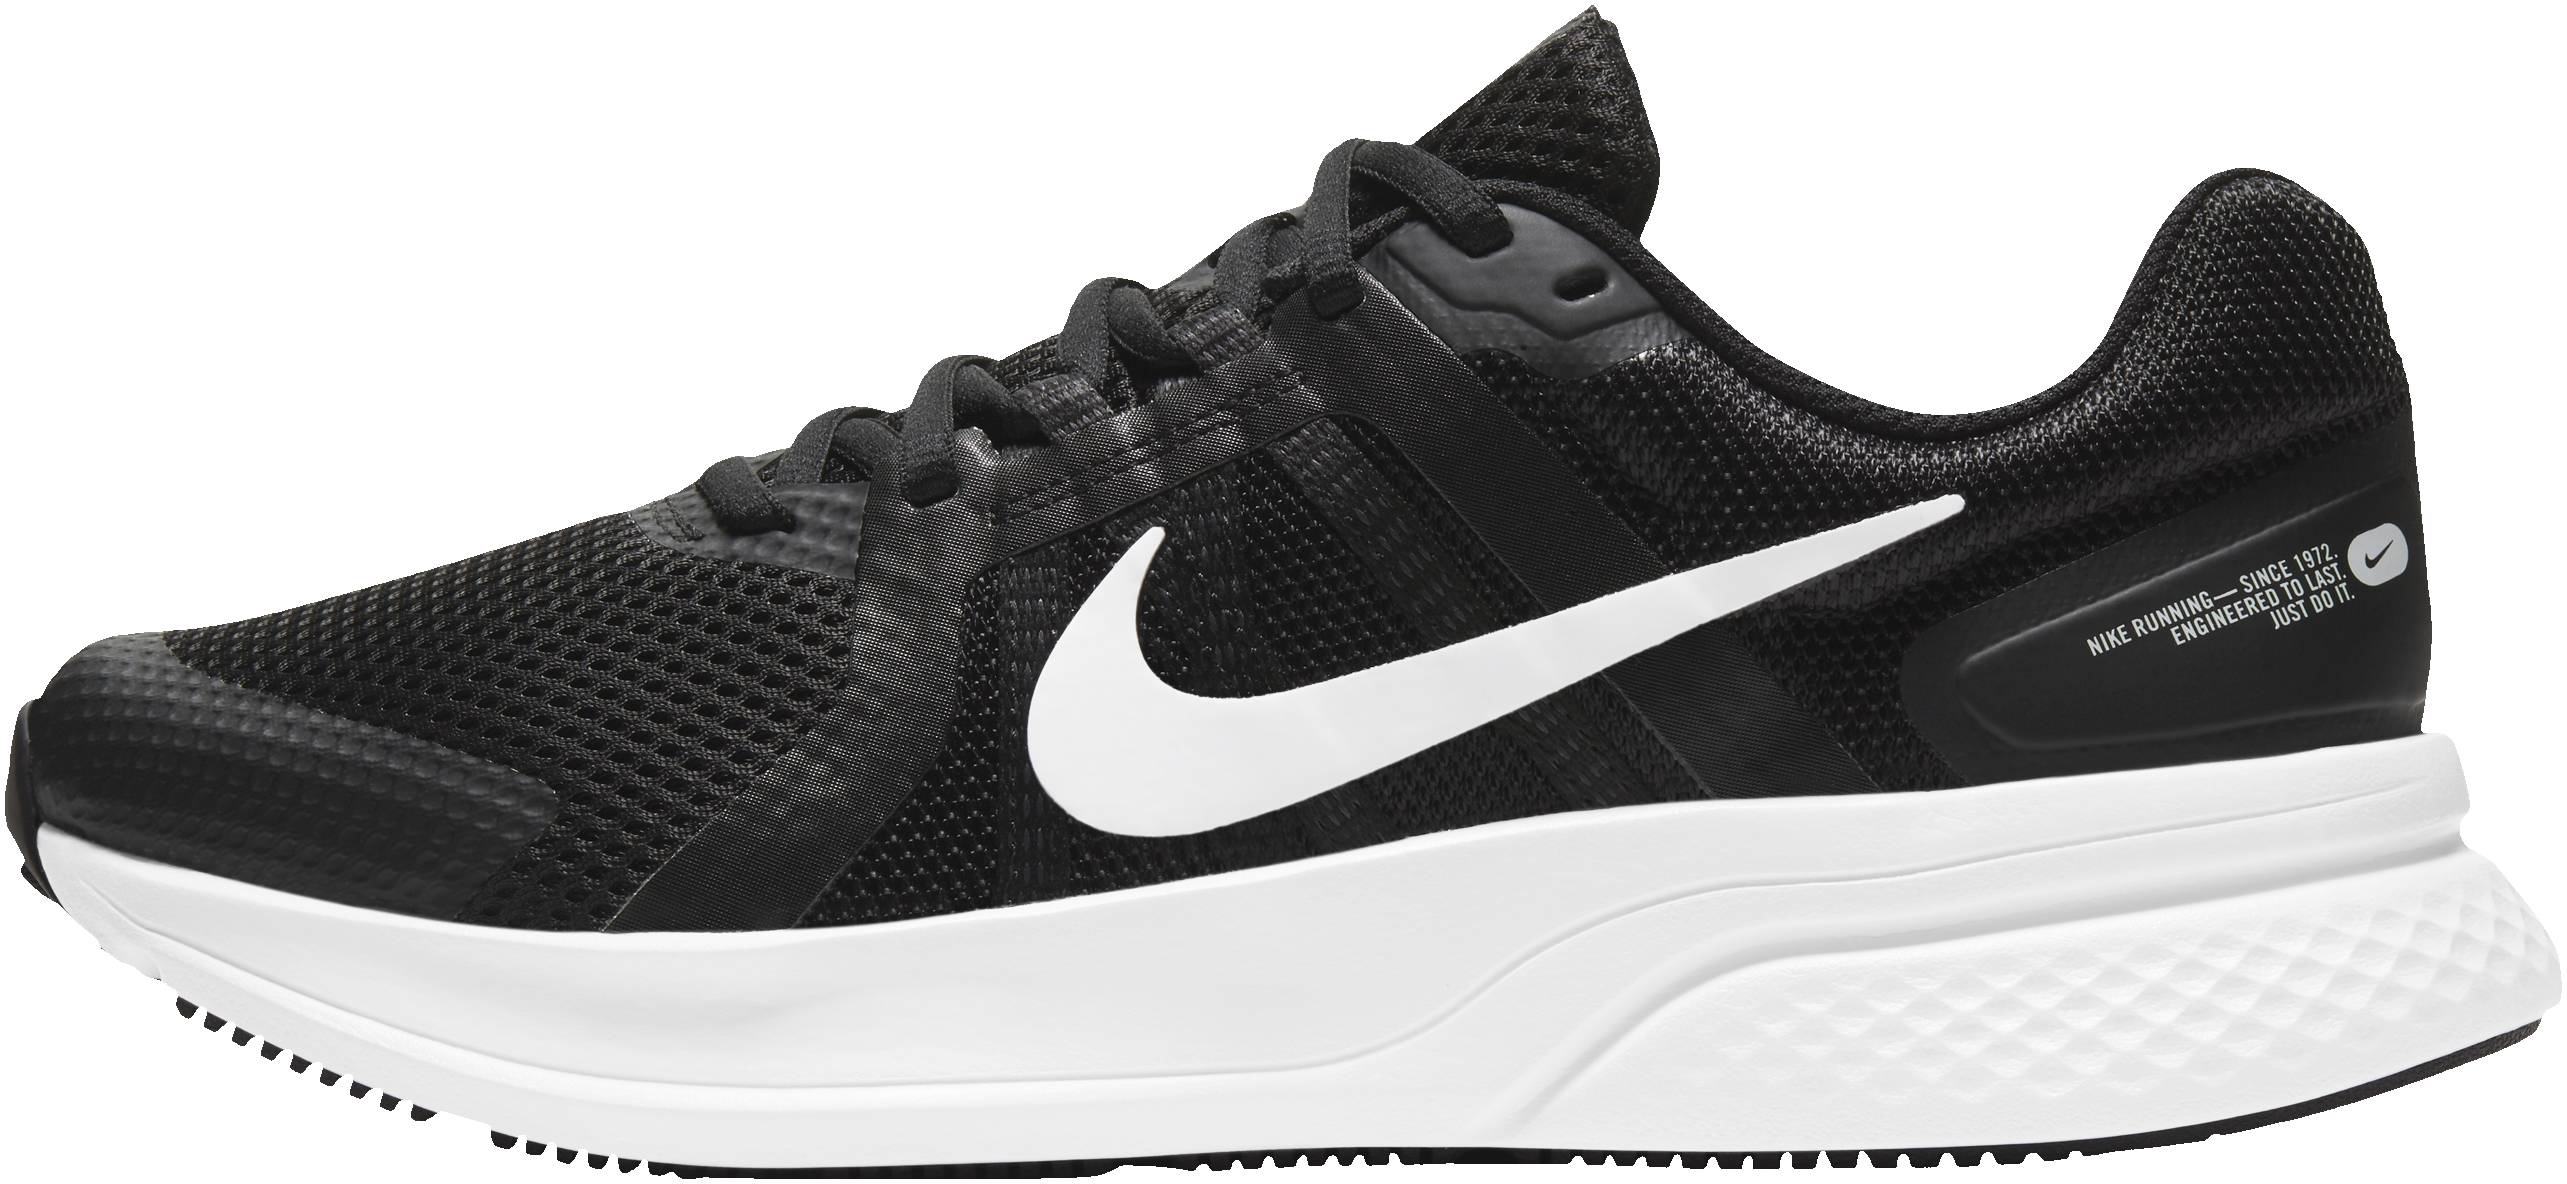 20+ X-wide Nike running shoes: Save up 